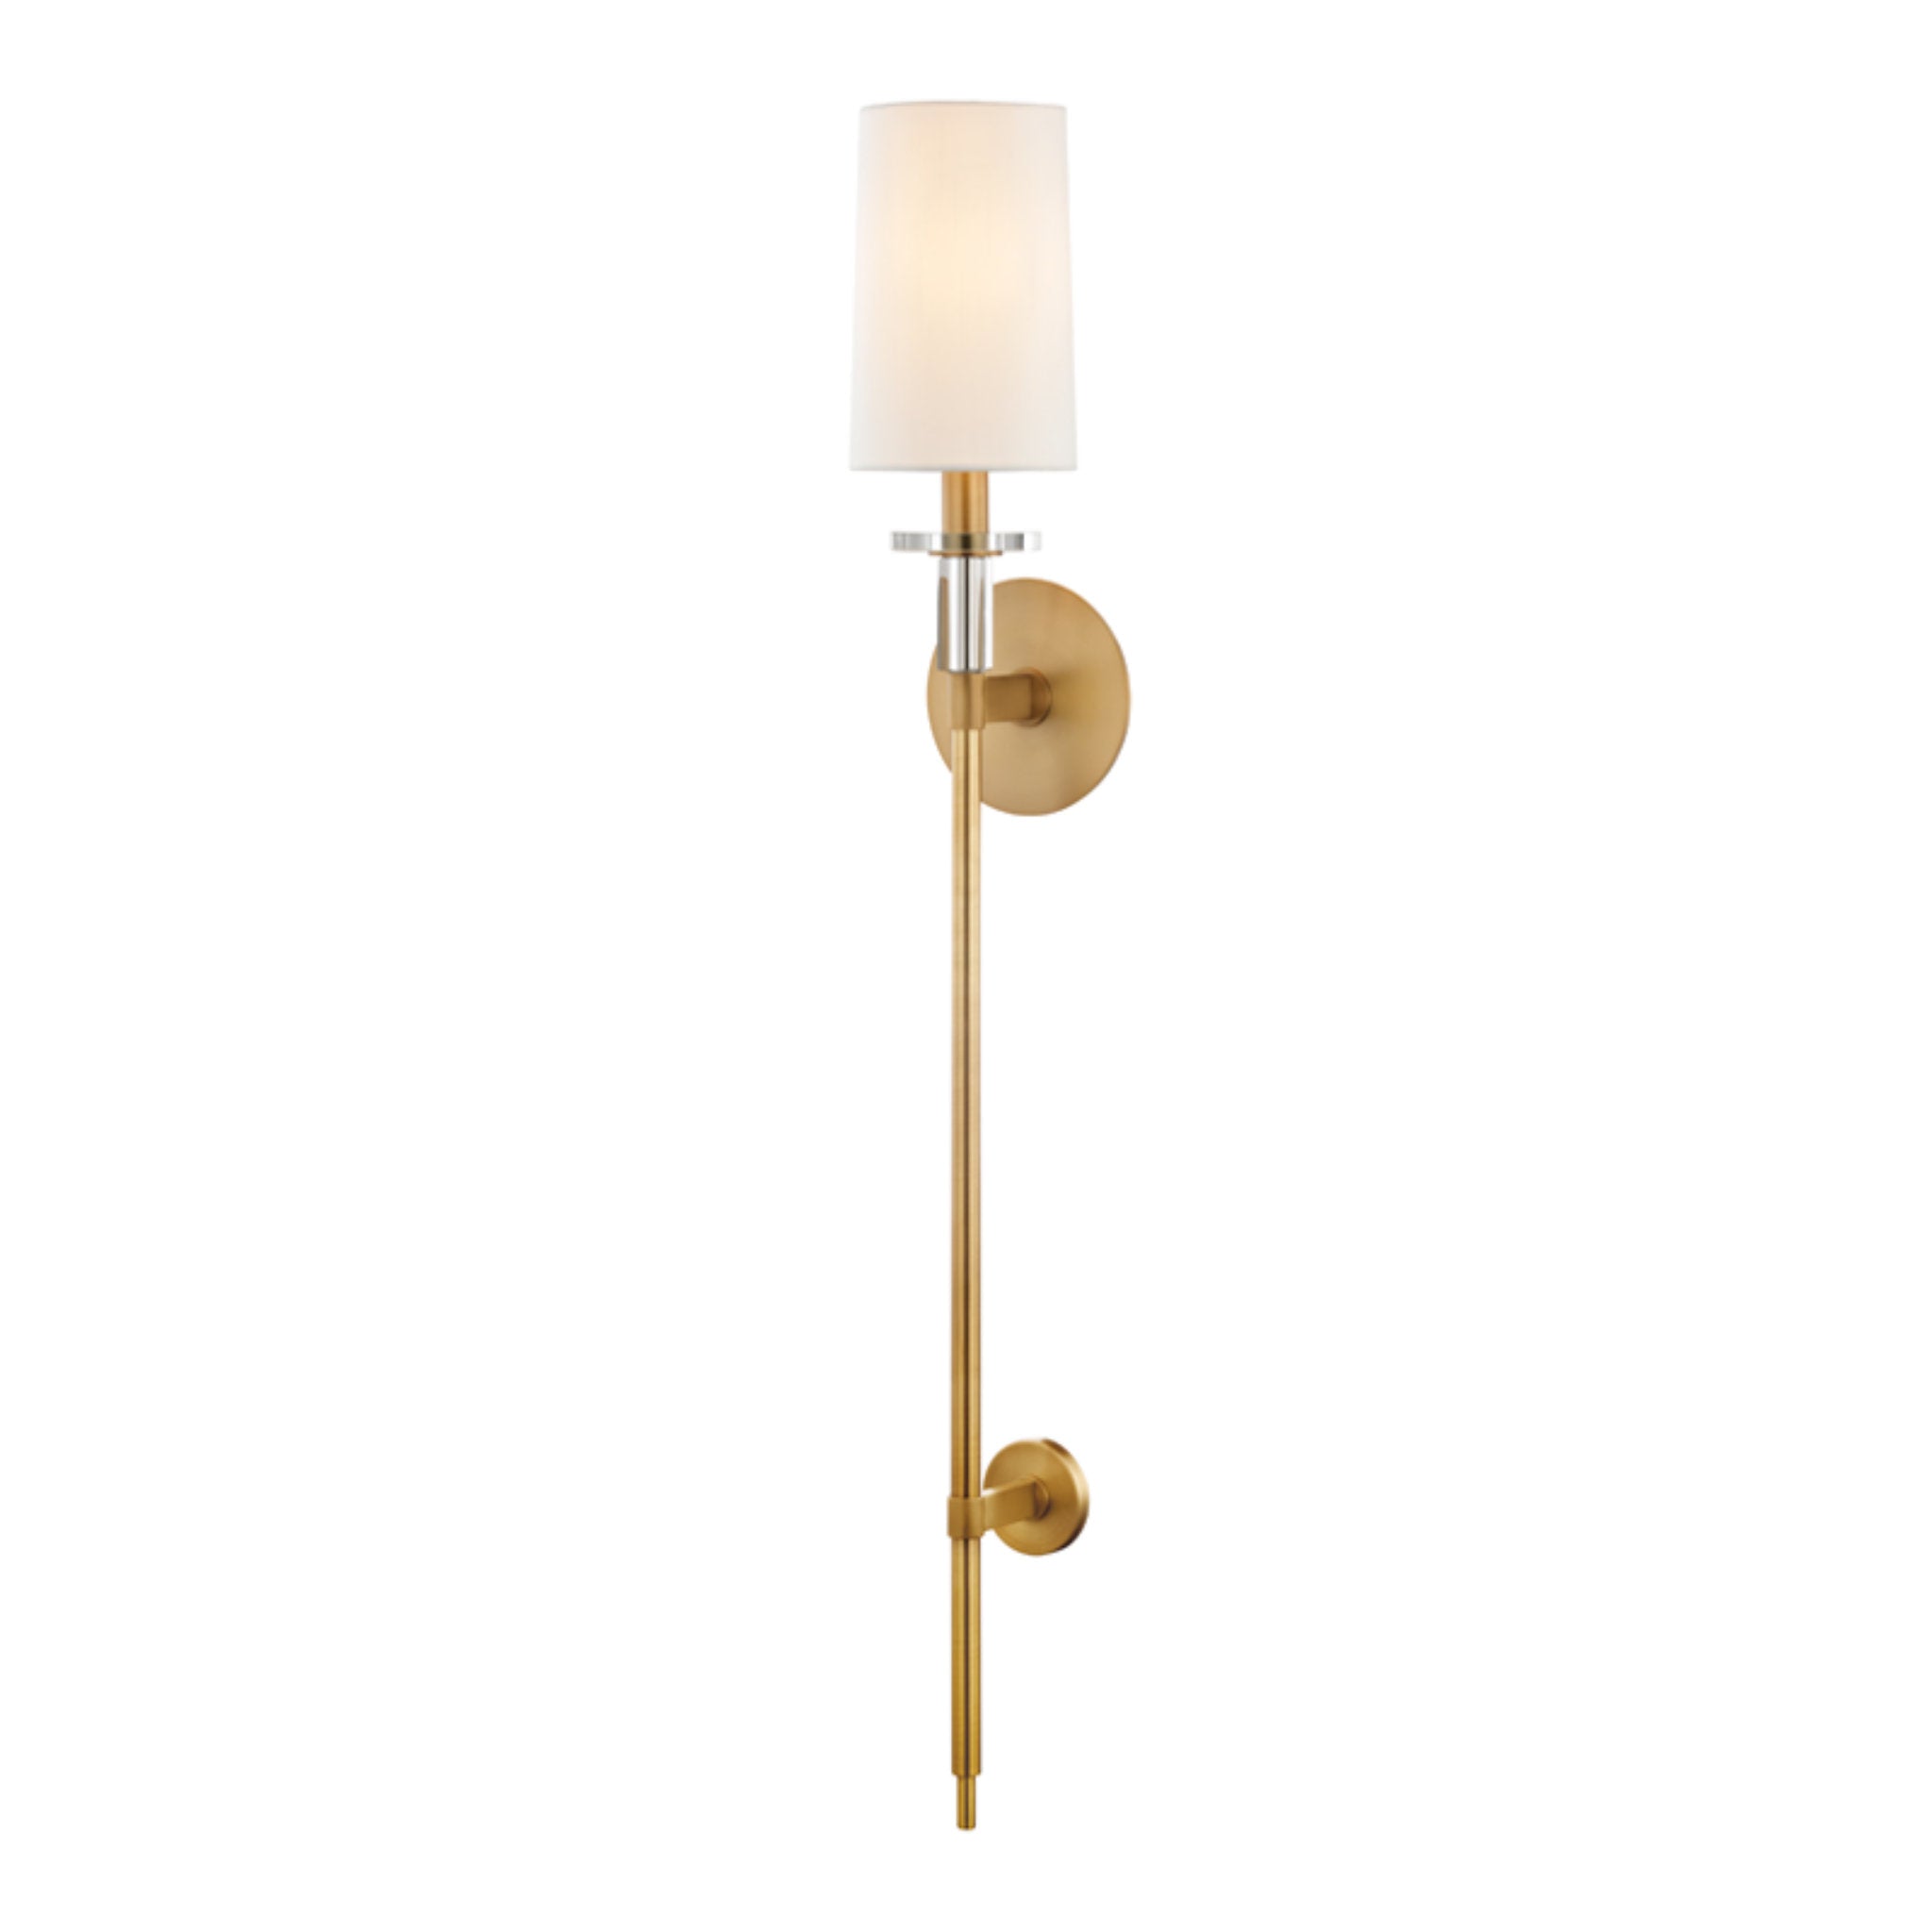 Amherst 1 Light Wall Sconce in Aged Brass